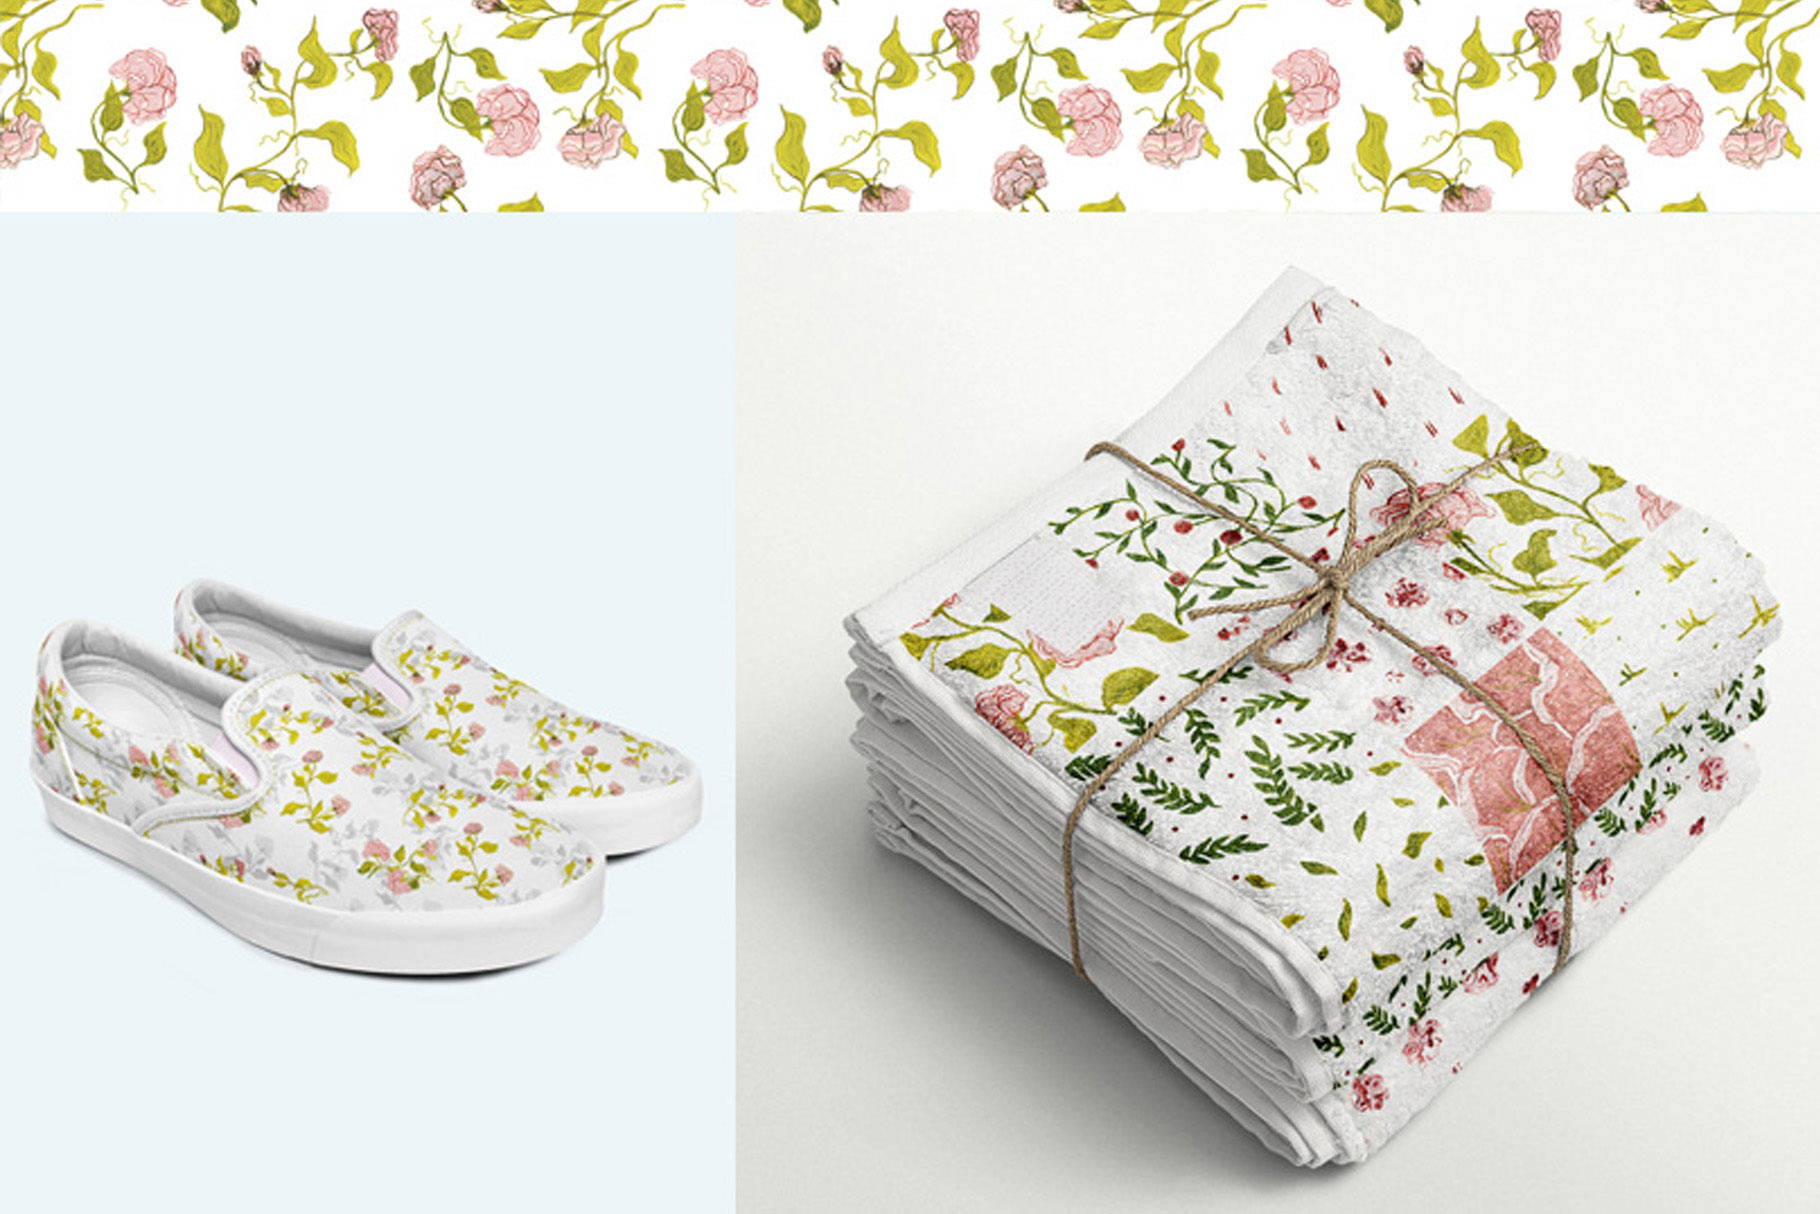 Floral Pattern Collection Of 10 Seamless Patterns And 5 Colored Backgrounds shoes Print Example